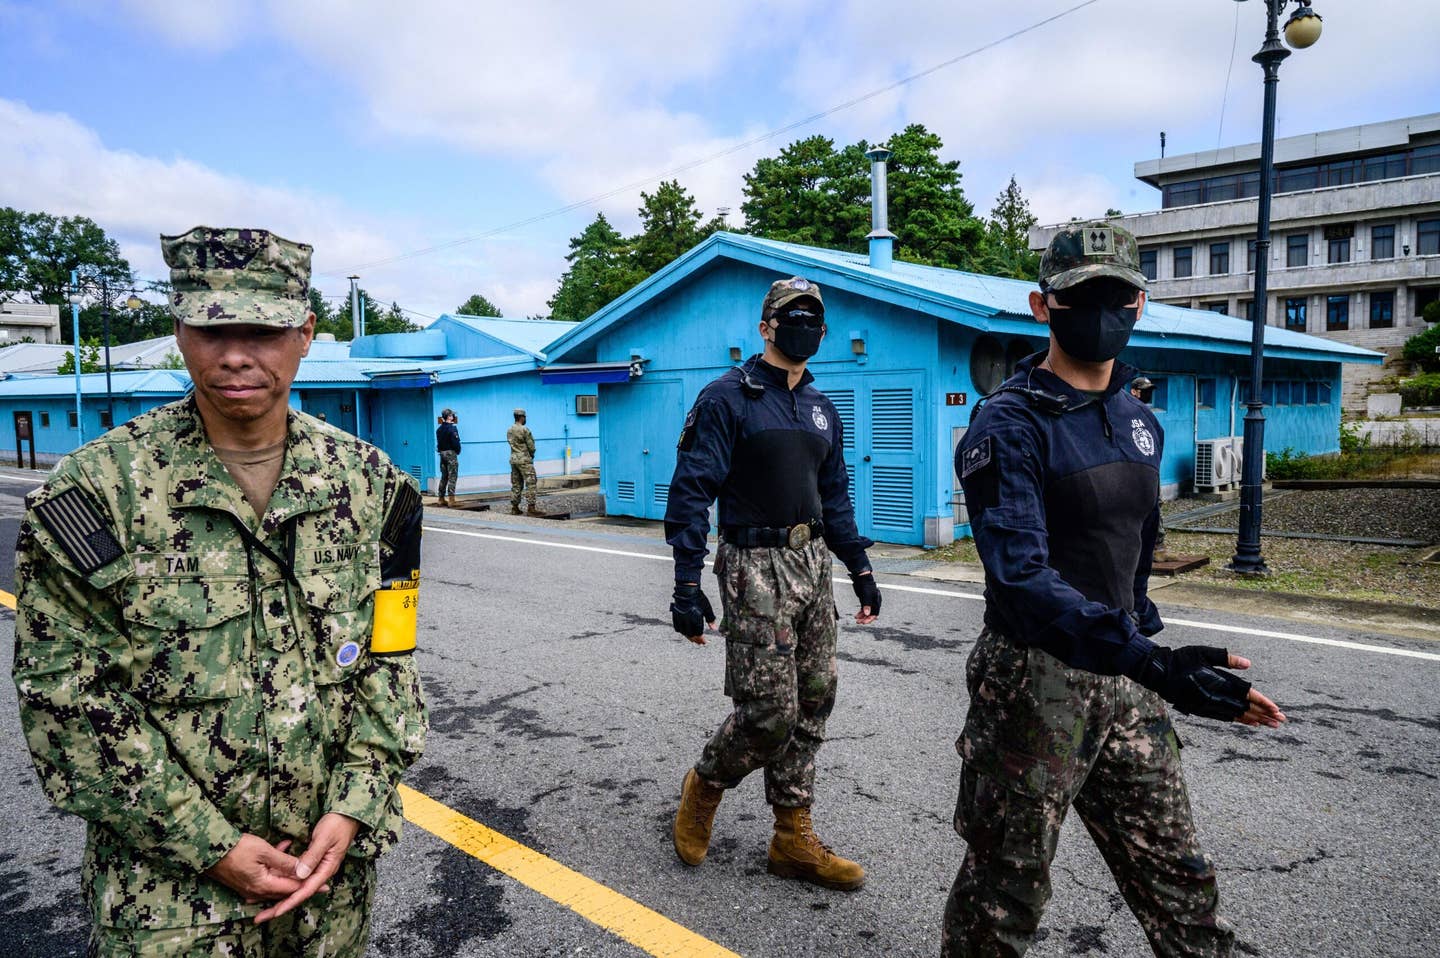 A United Nations Command) soldier (left) and South Korean troops walk in the Joint Security Area of the Demilitarized Zone in the truce village of Panmunjom on October 4, 2022. <em>Photo by ANTHONY WALLACE/AFP via Getty Images</em>